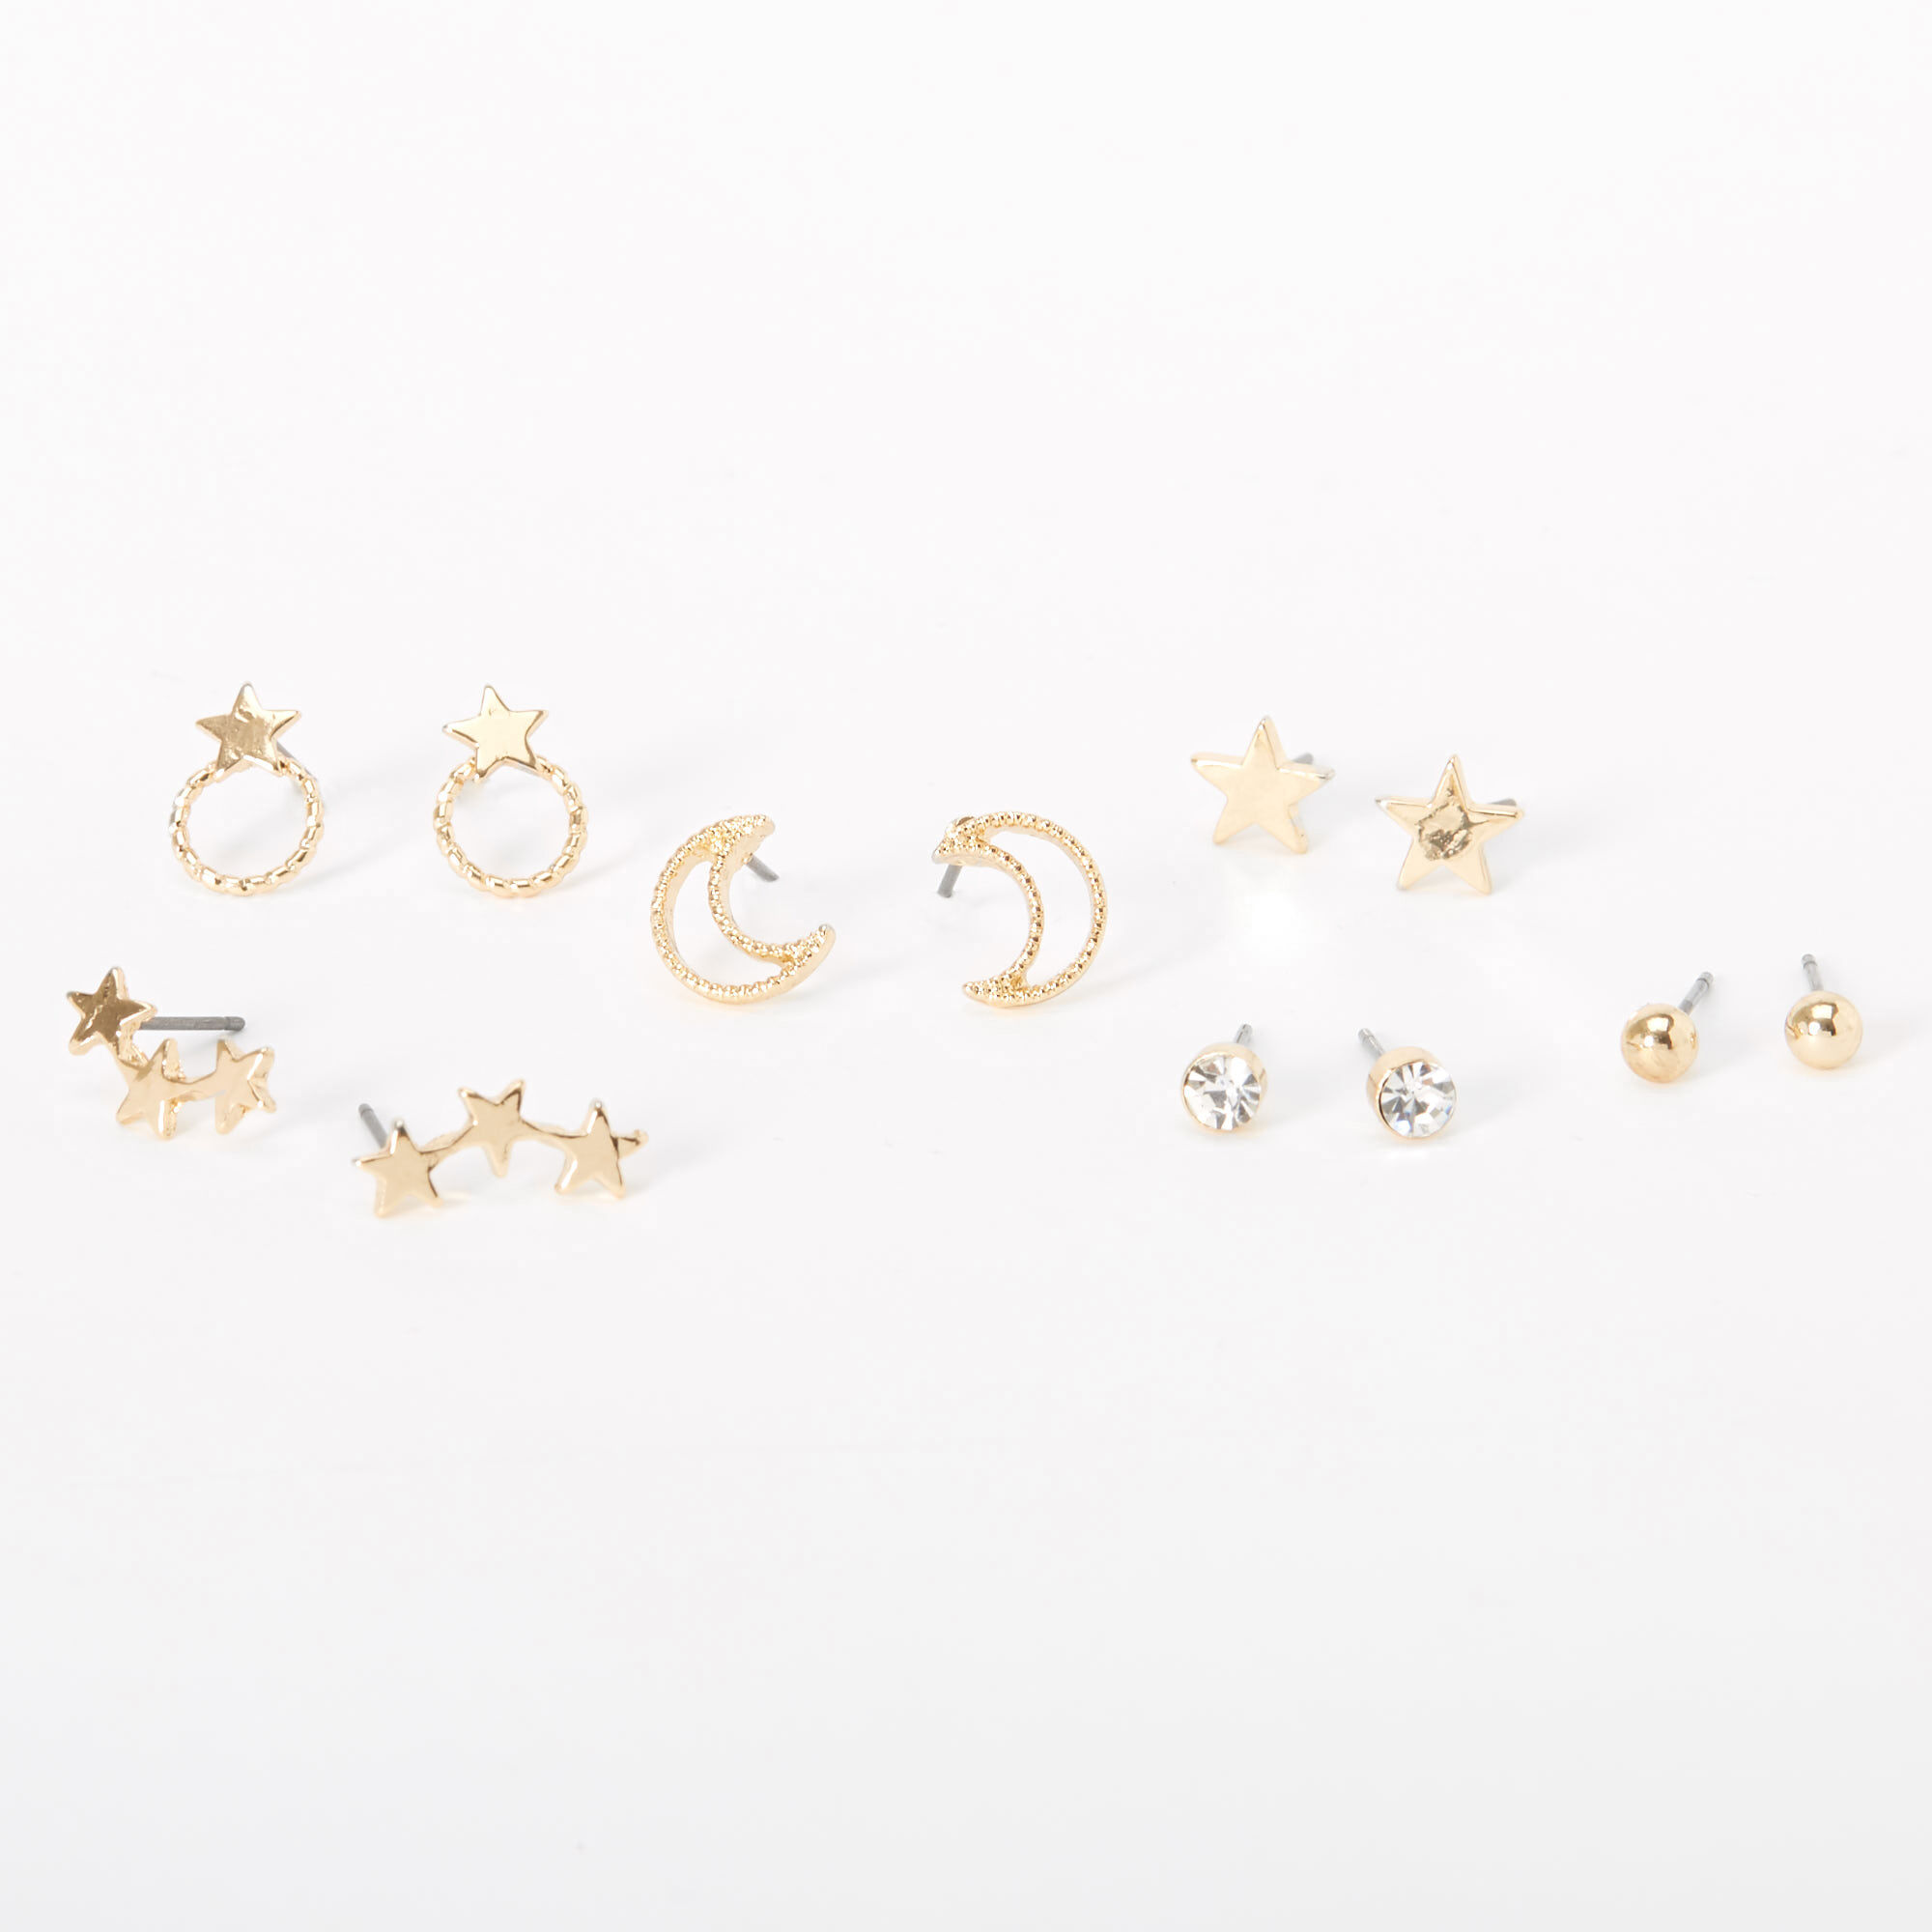 Solid Gold Crescent Moon and Star Mismatched Stud Earrings Jewellery Earrings Stud Earrings 